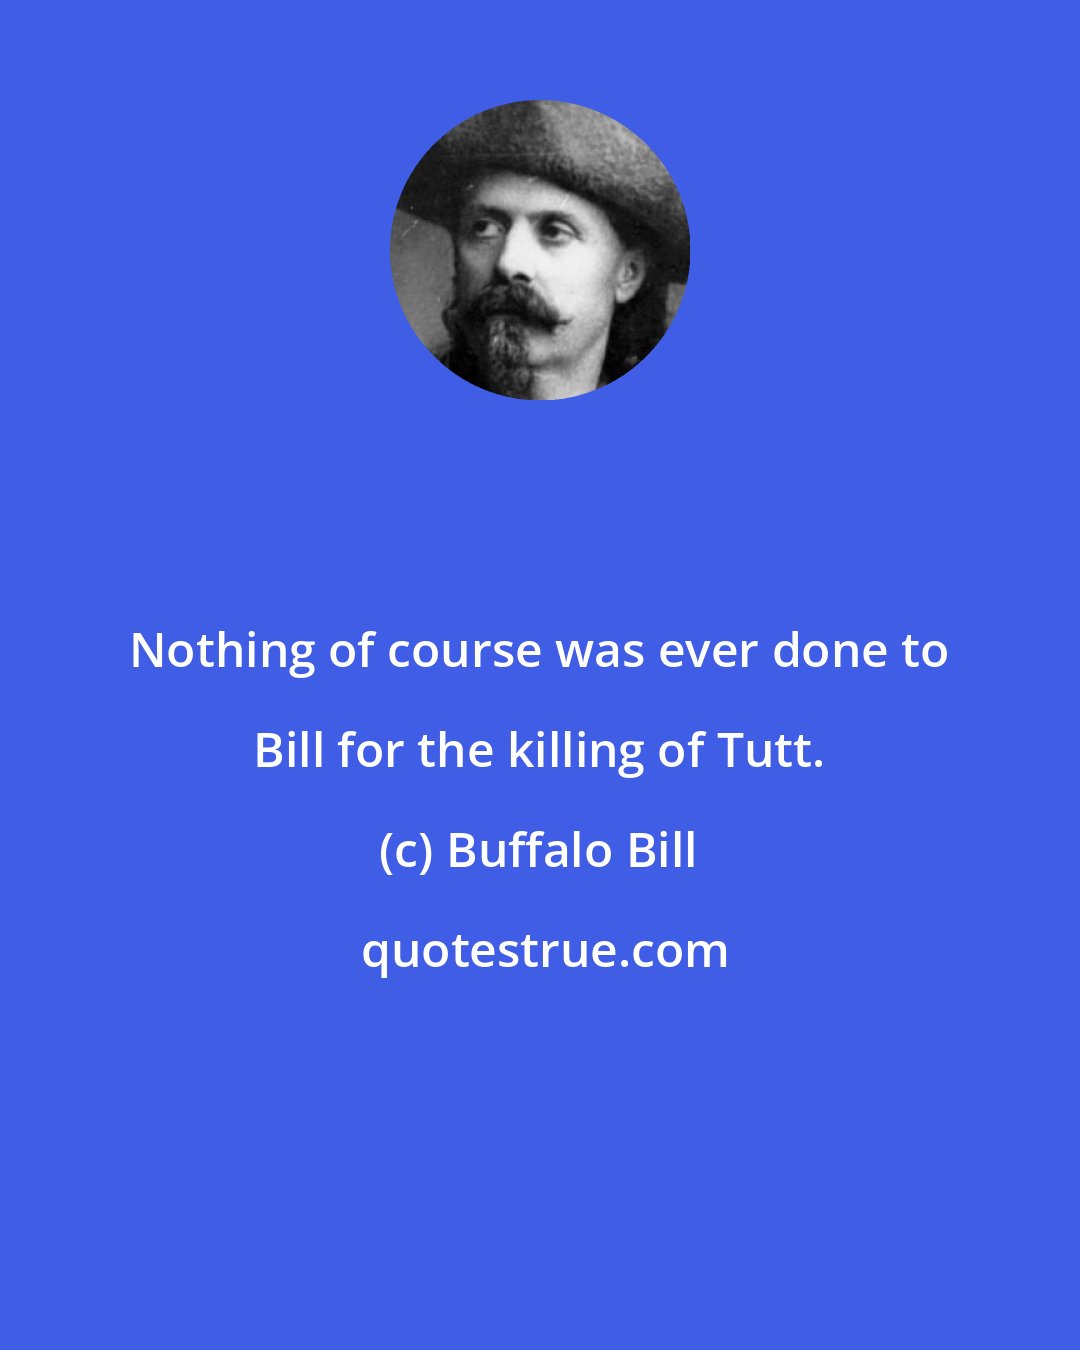 Buffalo Bill: Nothing of course was ever done to Bill for the killing of Tutt.